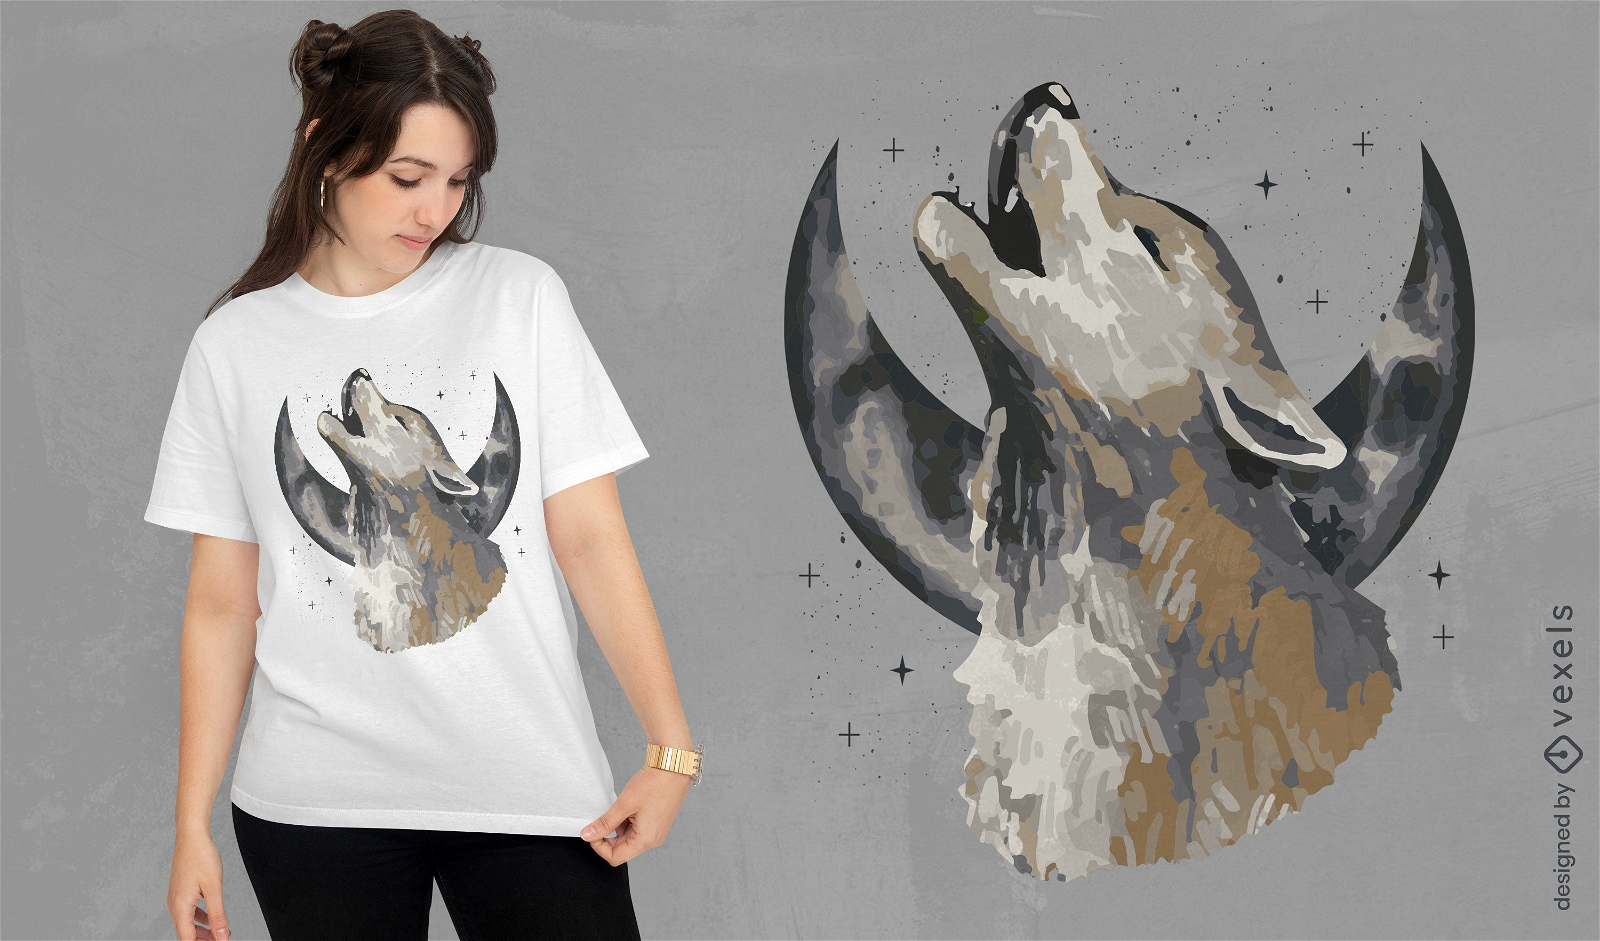 Howling wolf painting t-shirt design